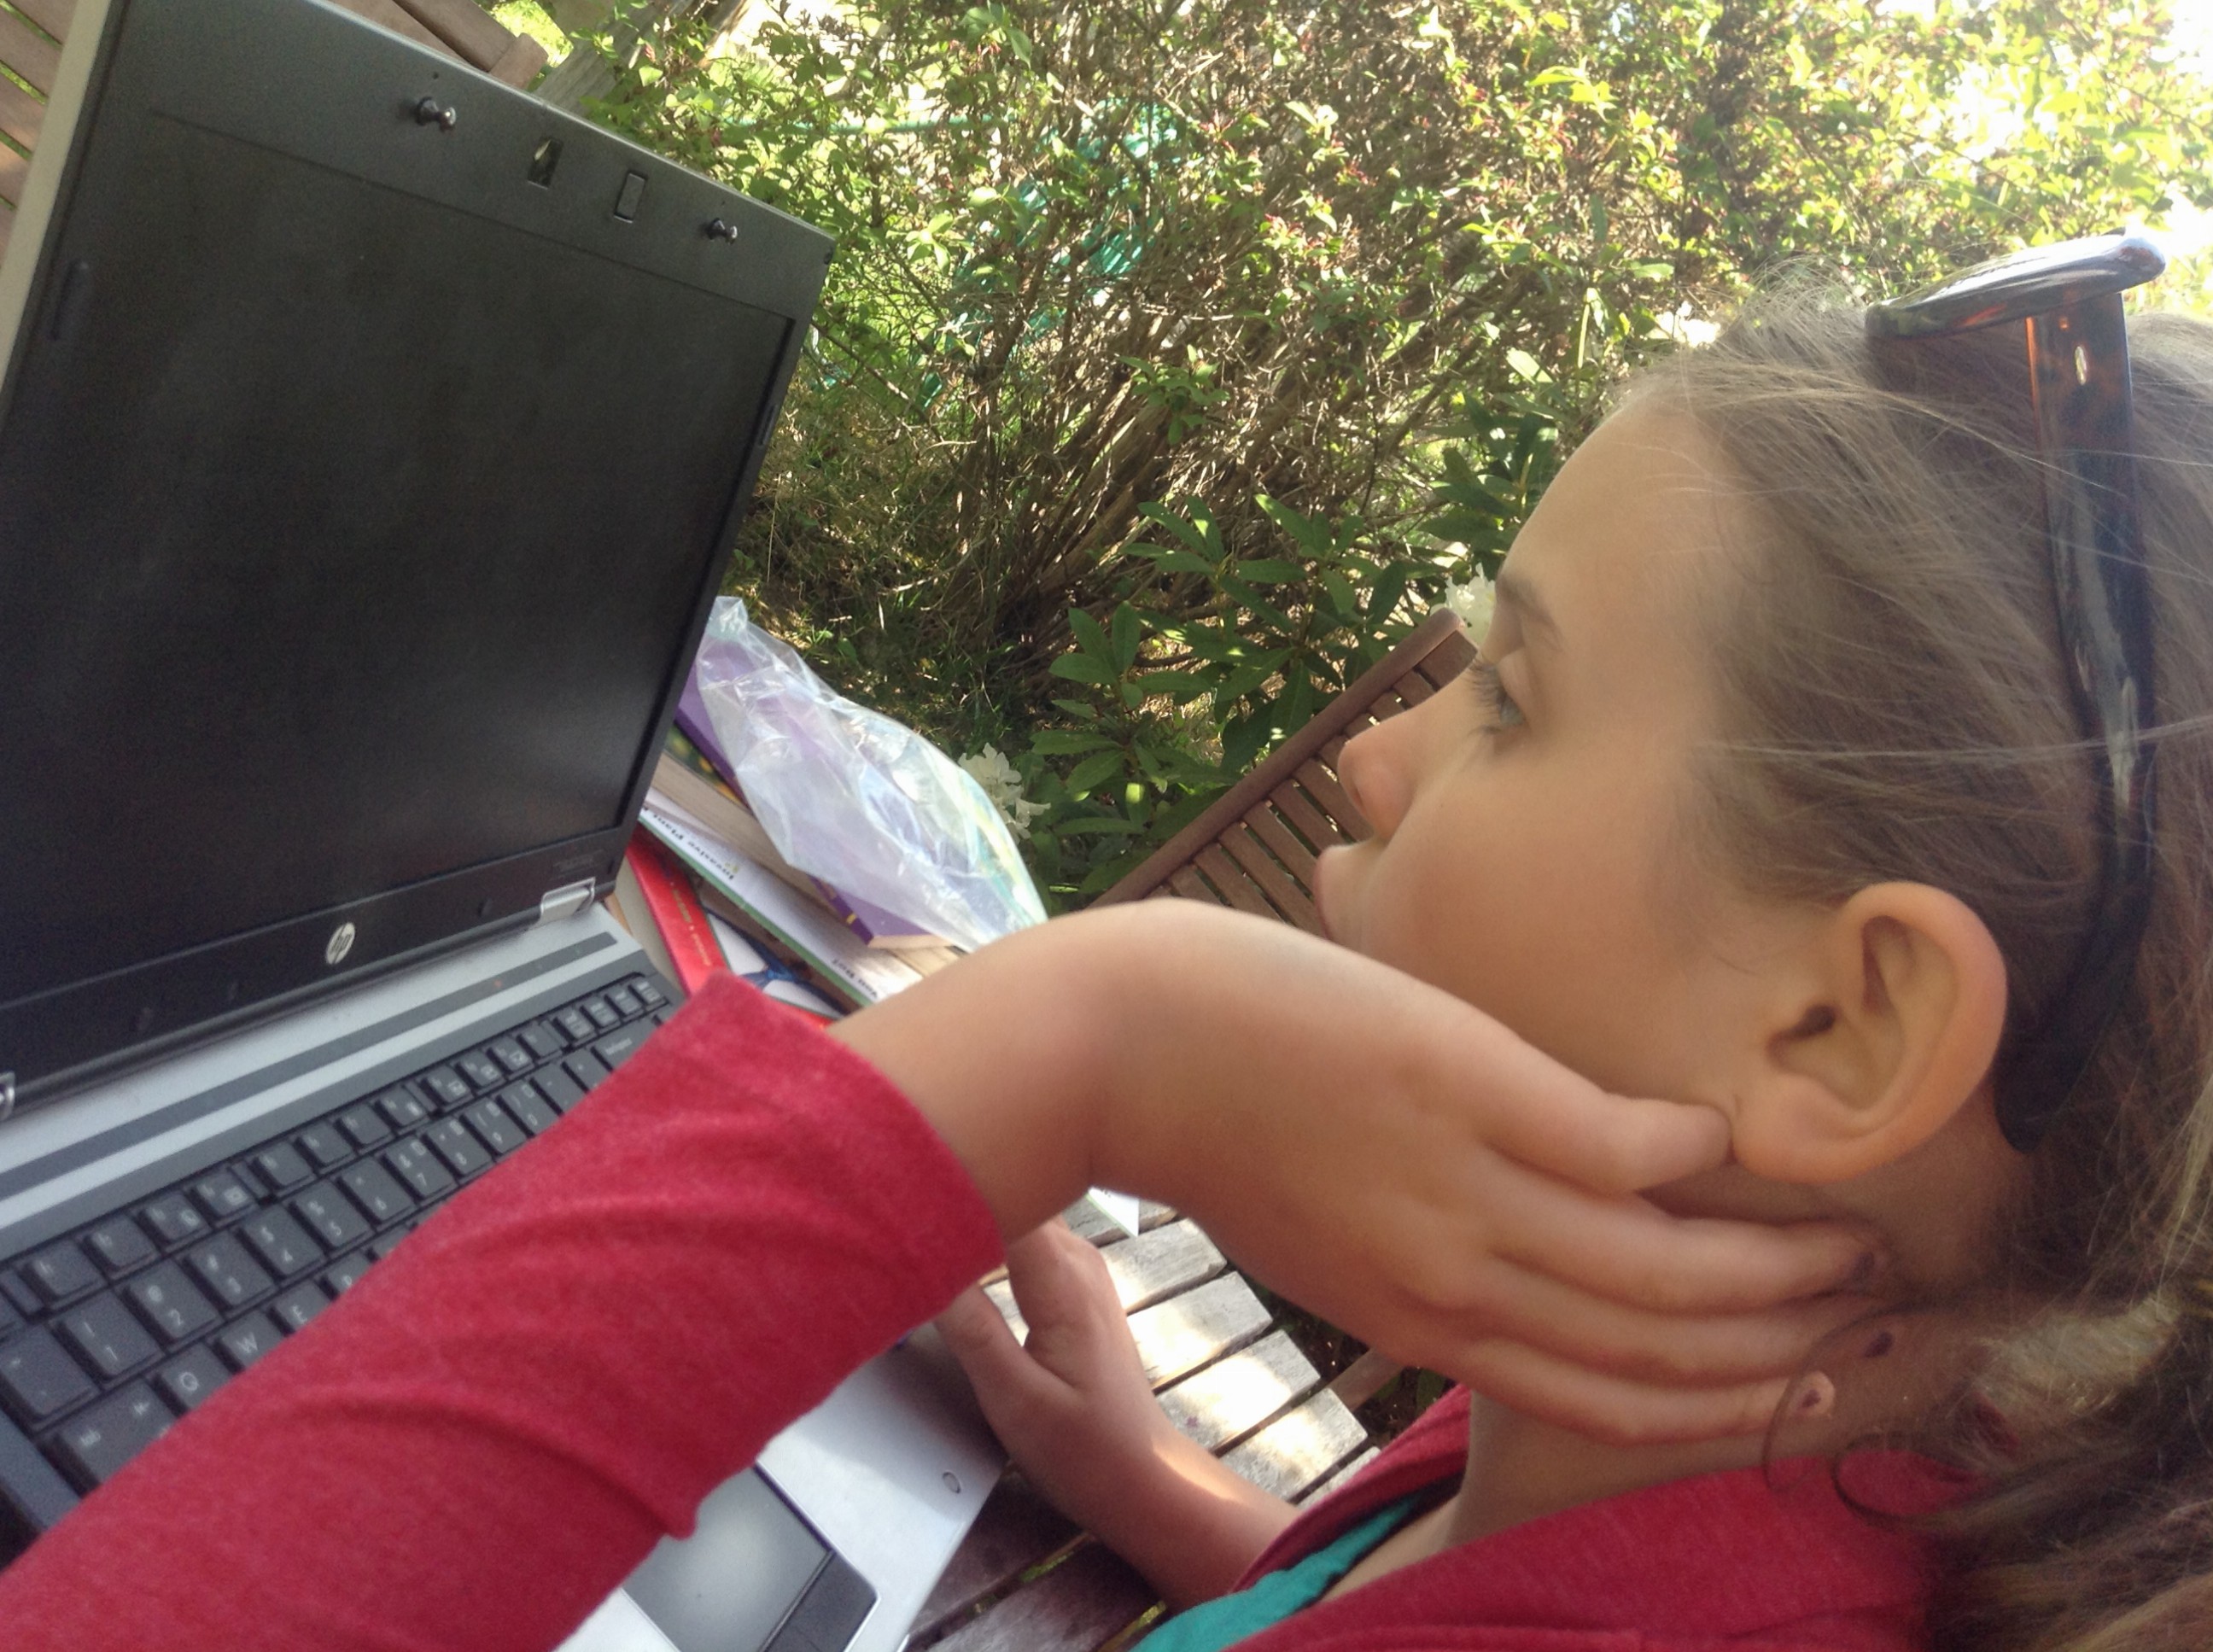 Madelyn on the computer in the garden: is this formal studies or unschooling?